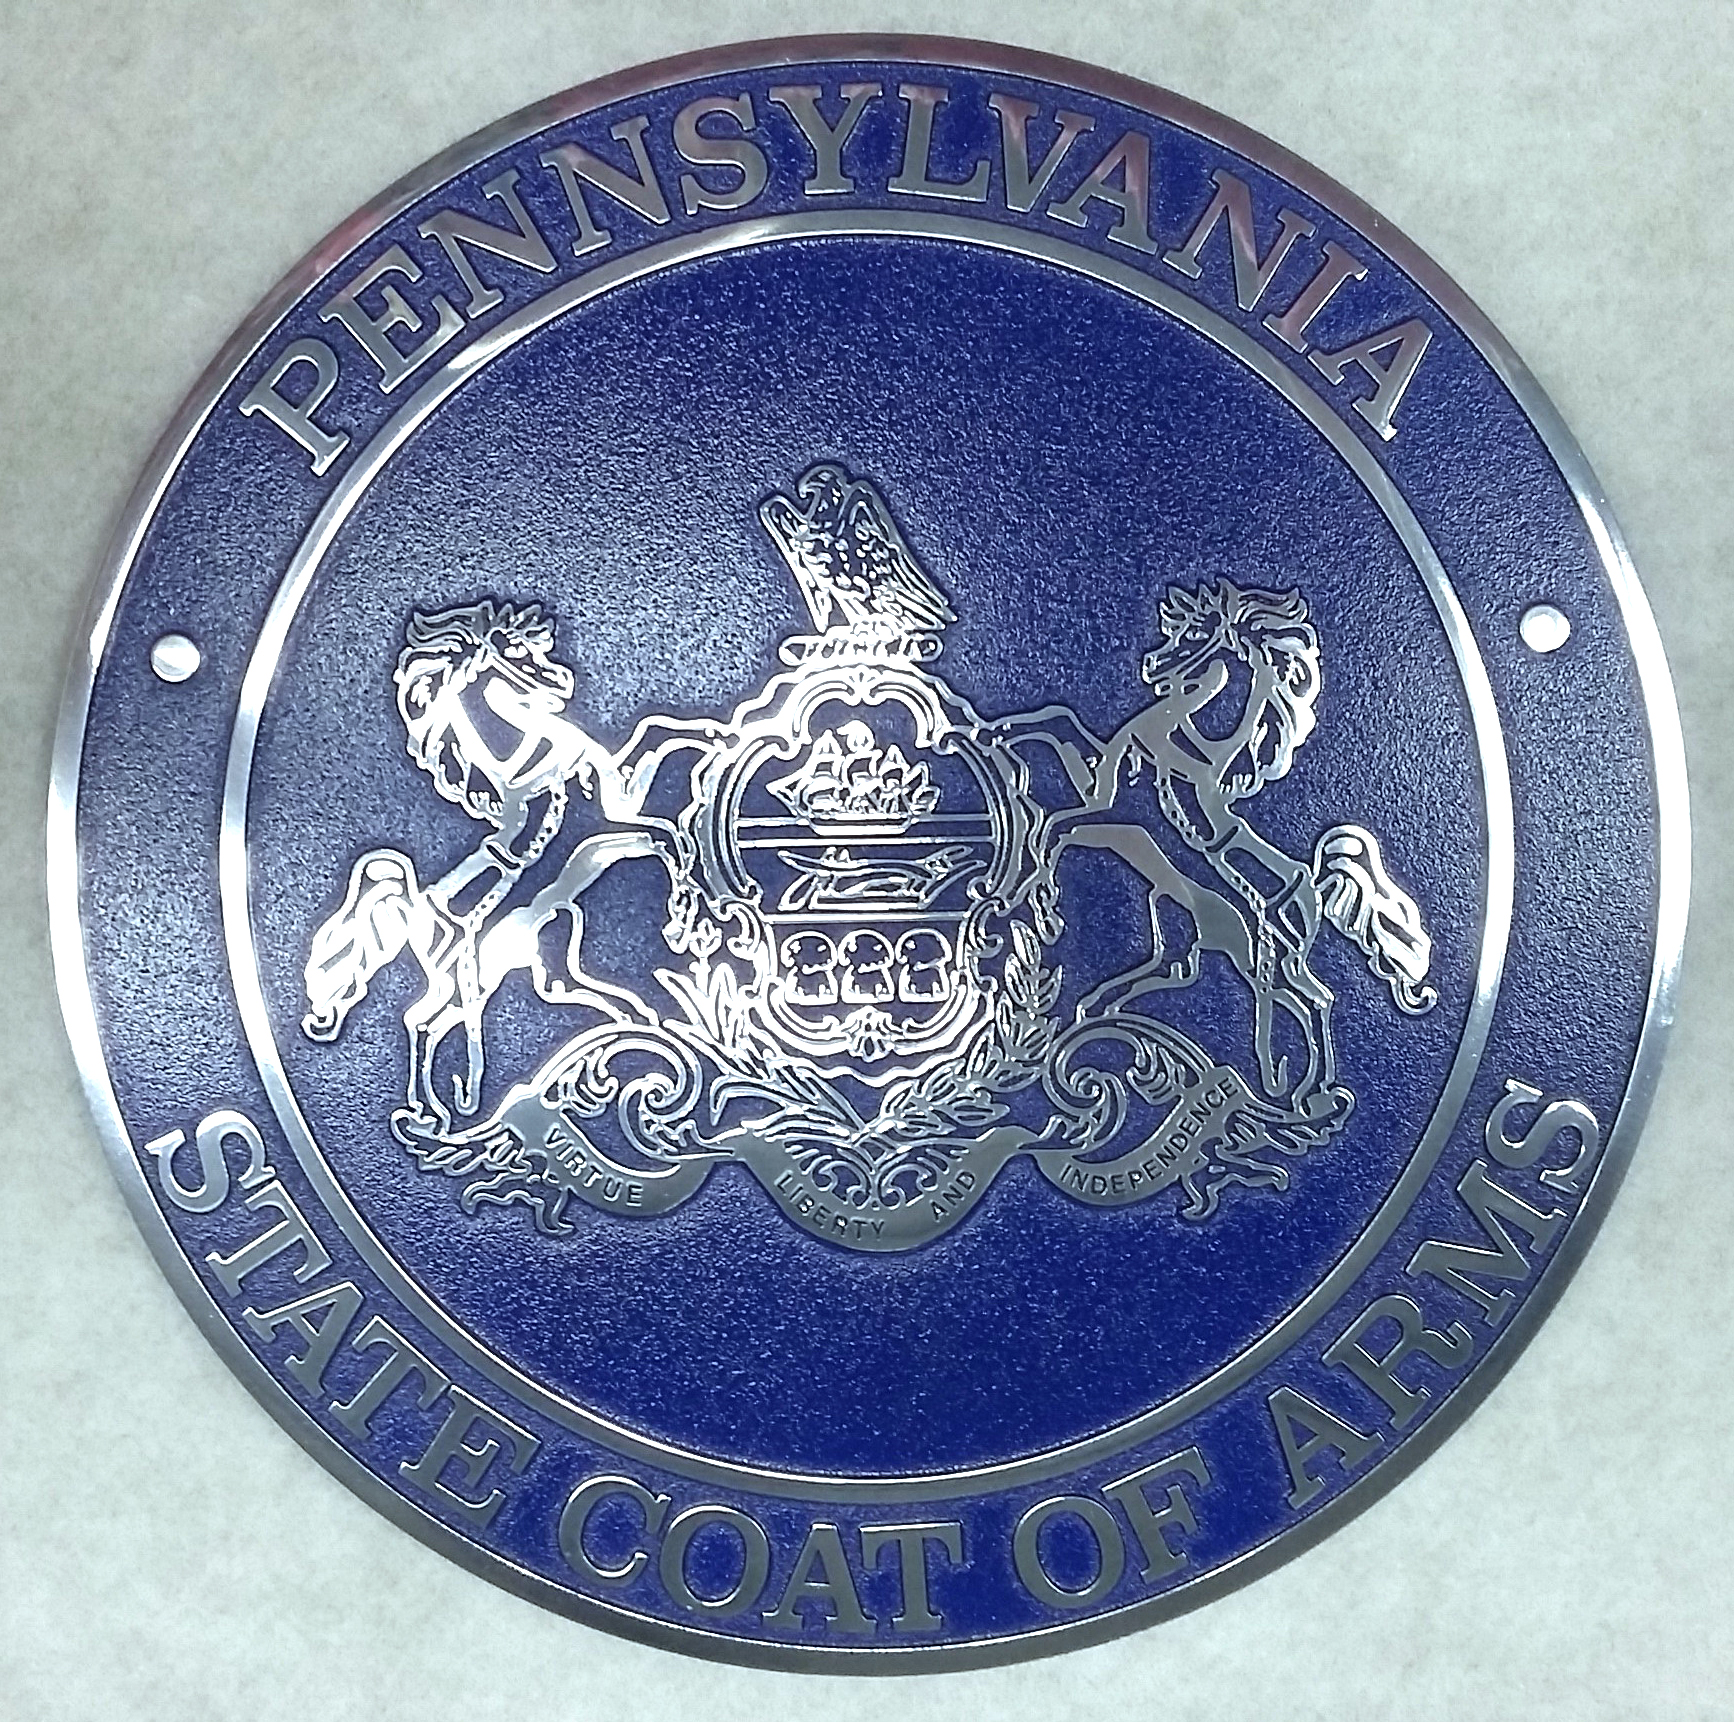 State Coat of Arms: Painted engraved plaque